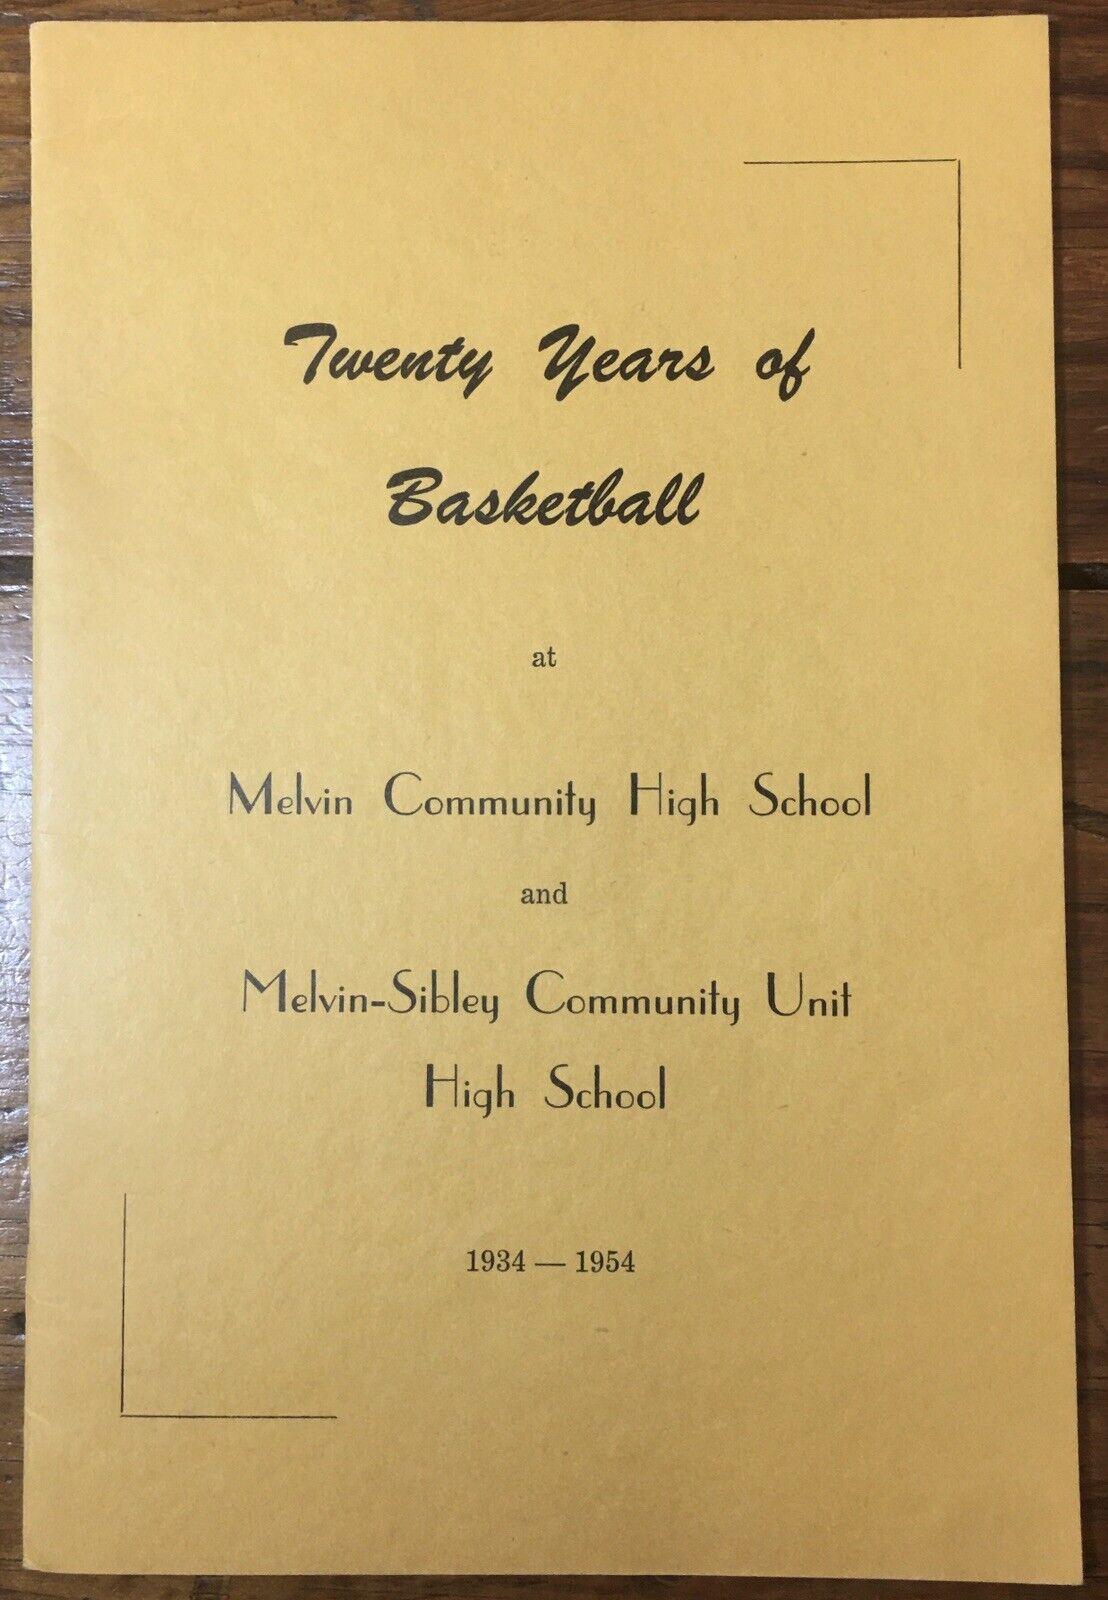 Twenty Years of Basketball at Melvin-Sibley High School, 1934-1954 w/ Clipping